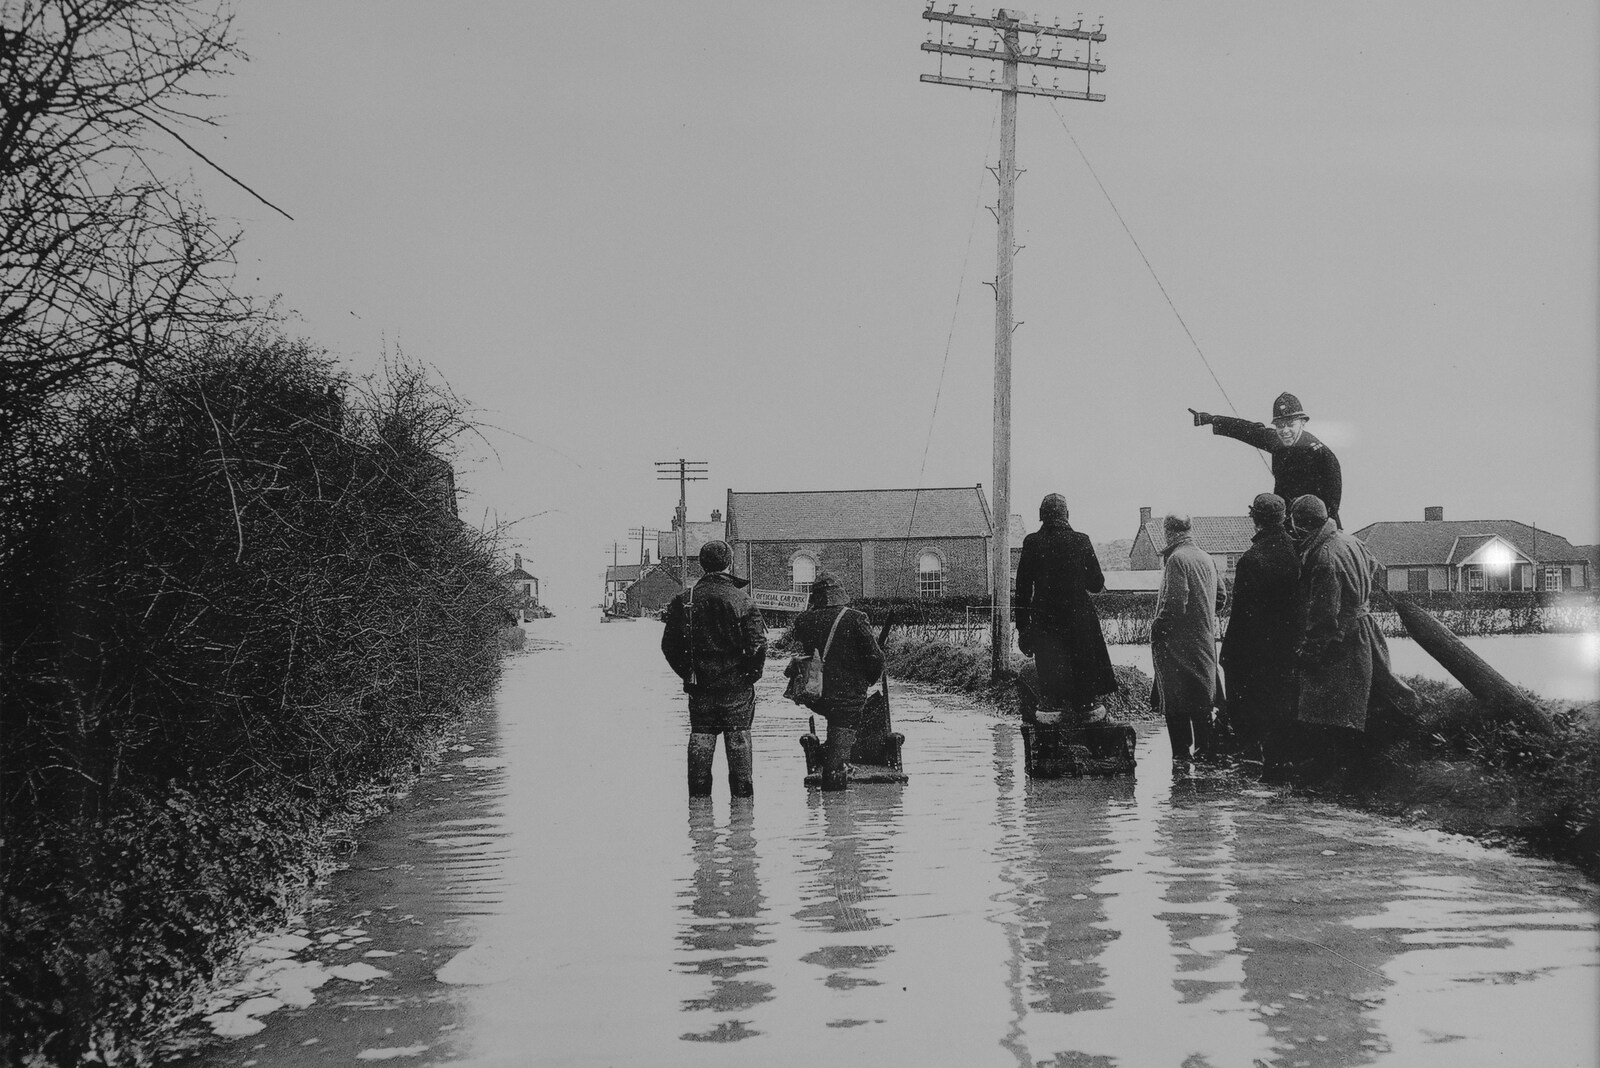 A flooded Sea Palling in 1953 from On the Beach at Sea Palling, Norfolk - 8th May 2022